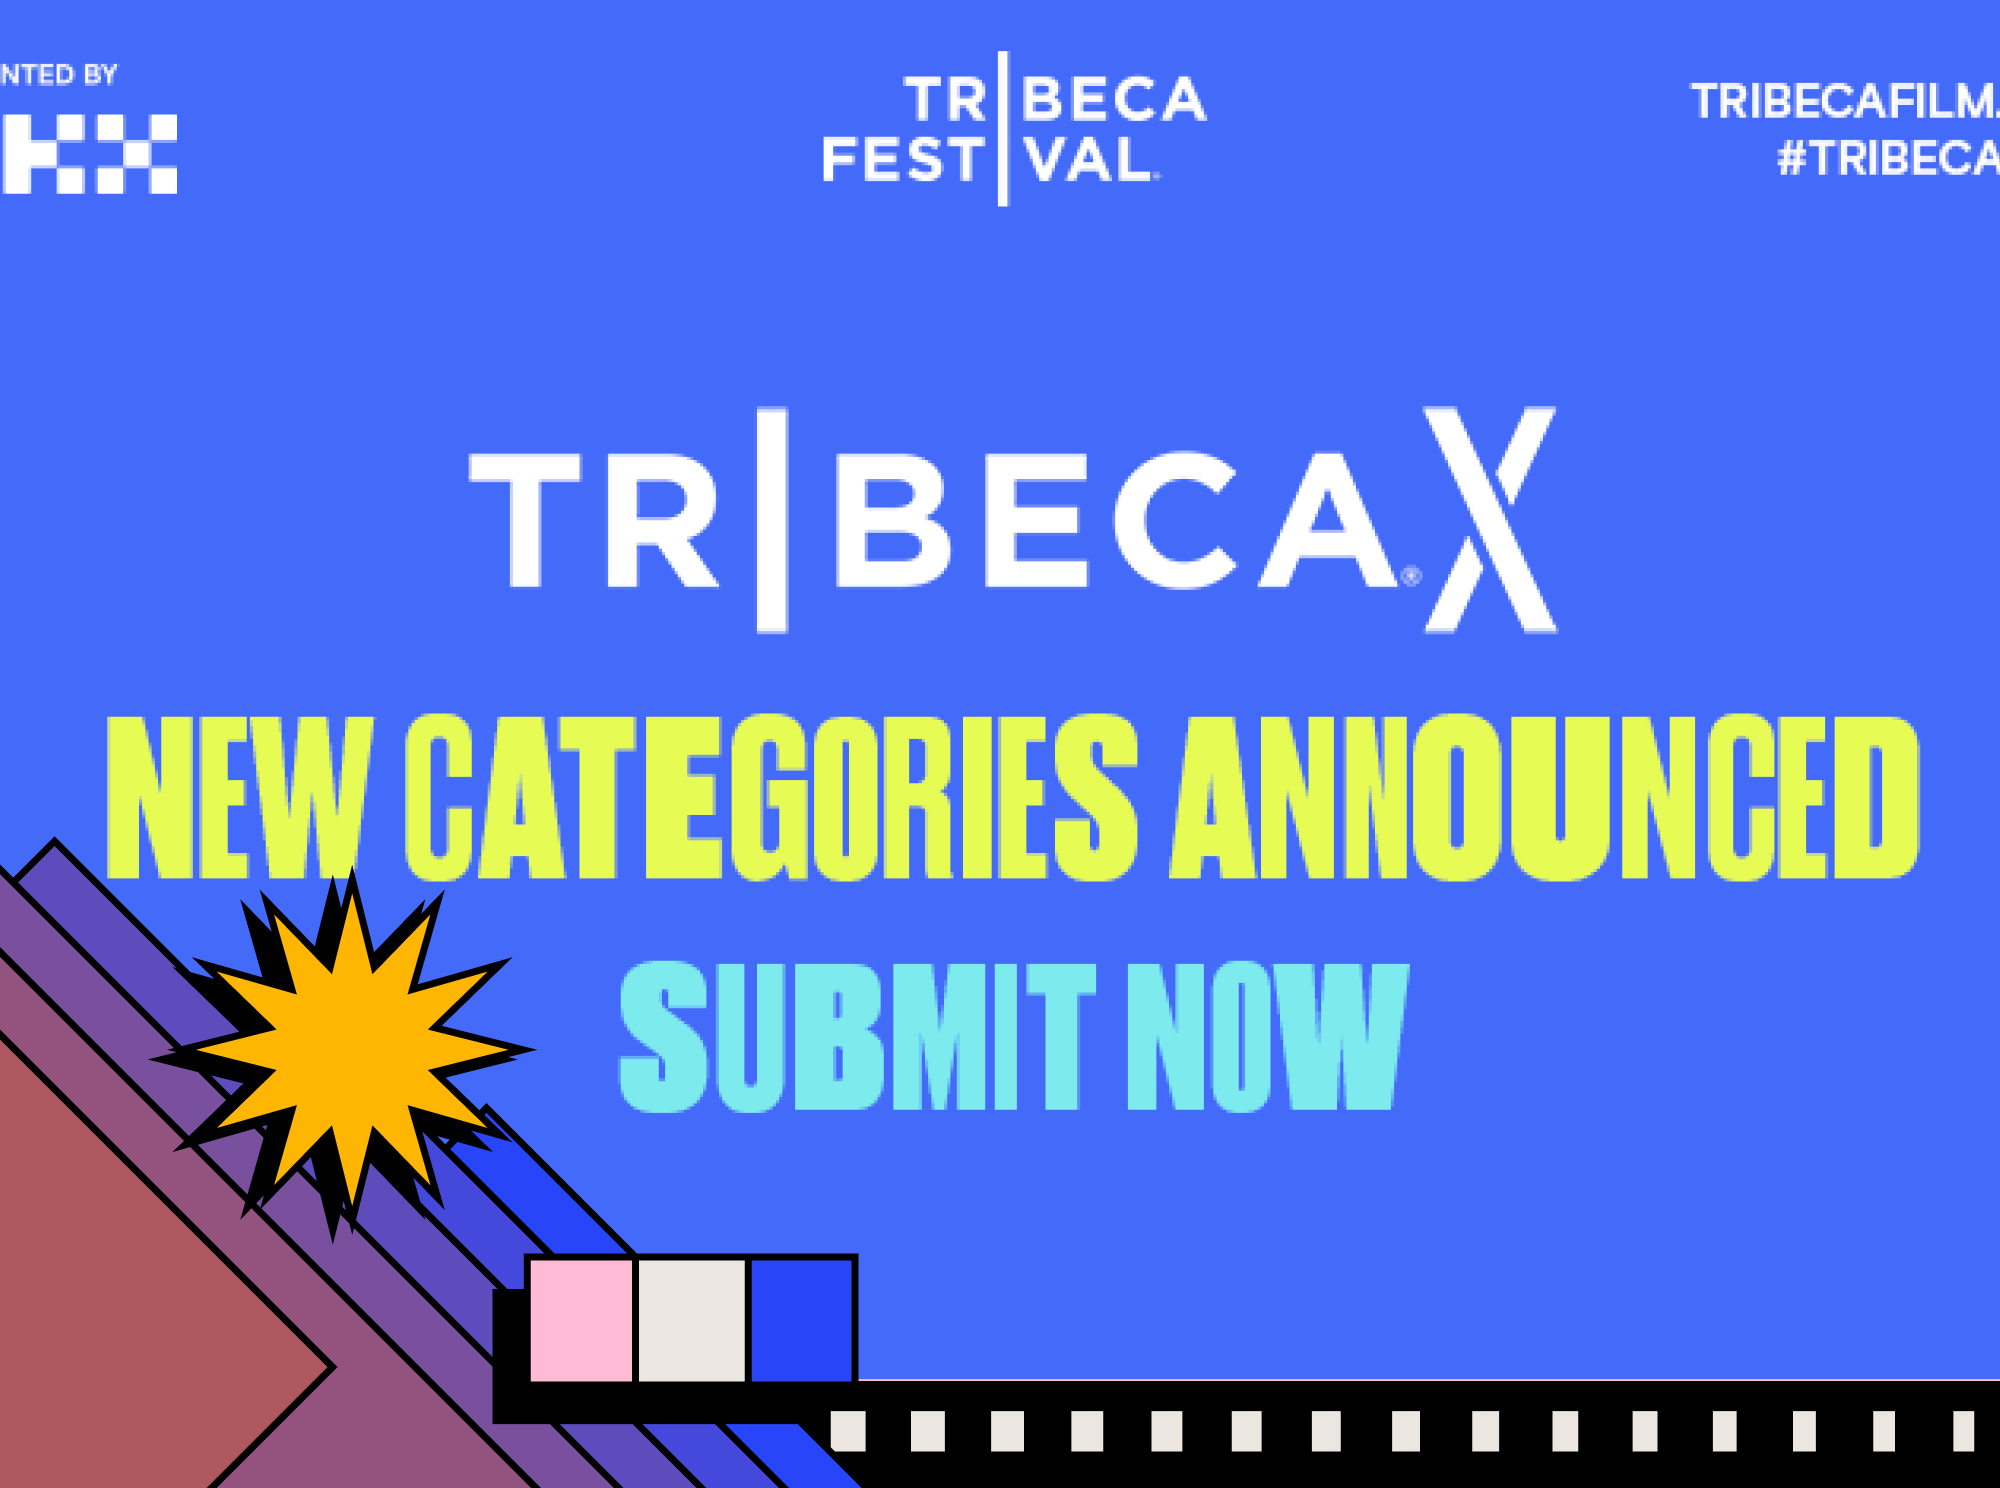 Tribeca Film Festival Open for Submissions